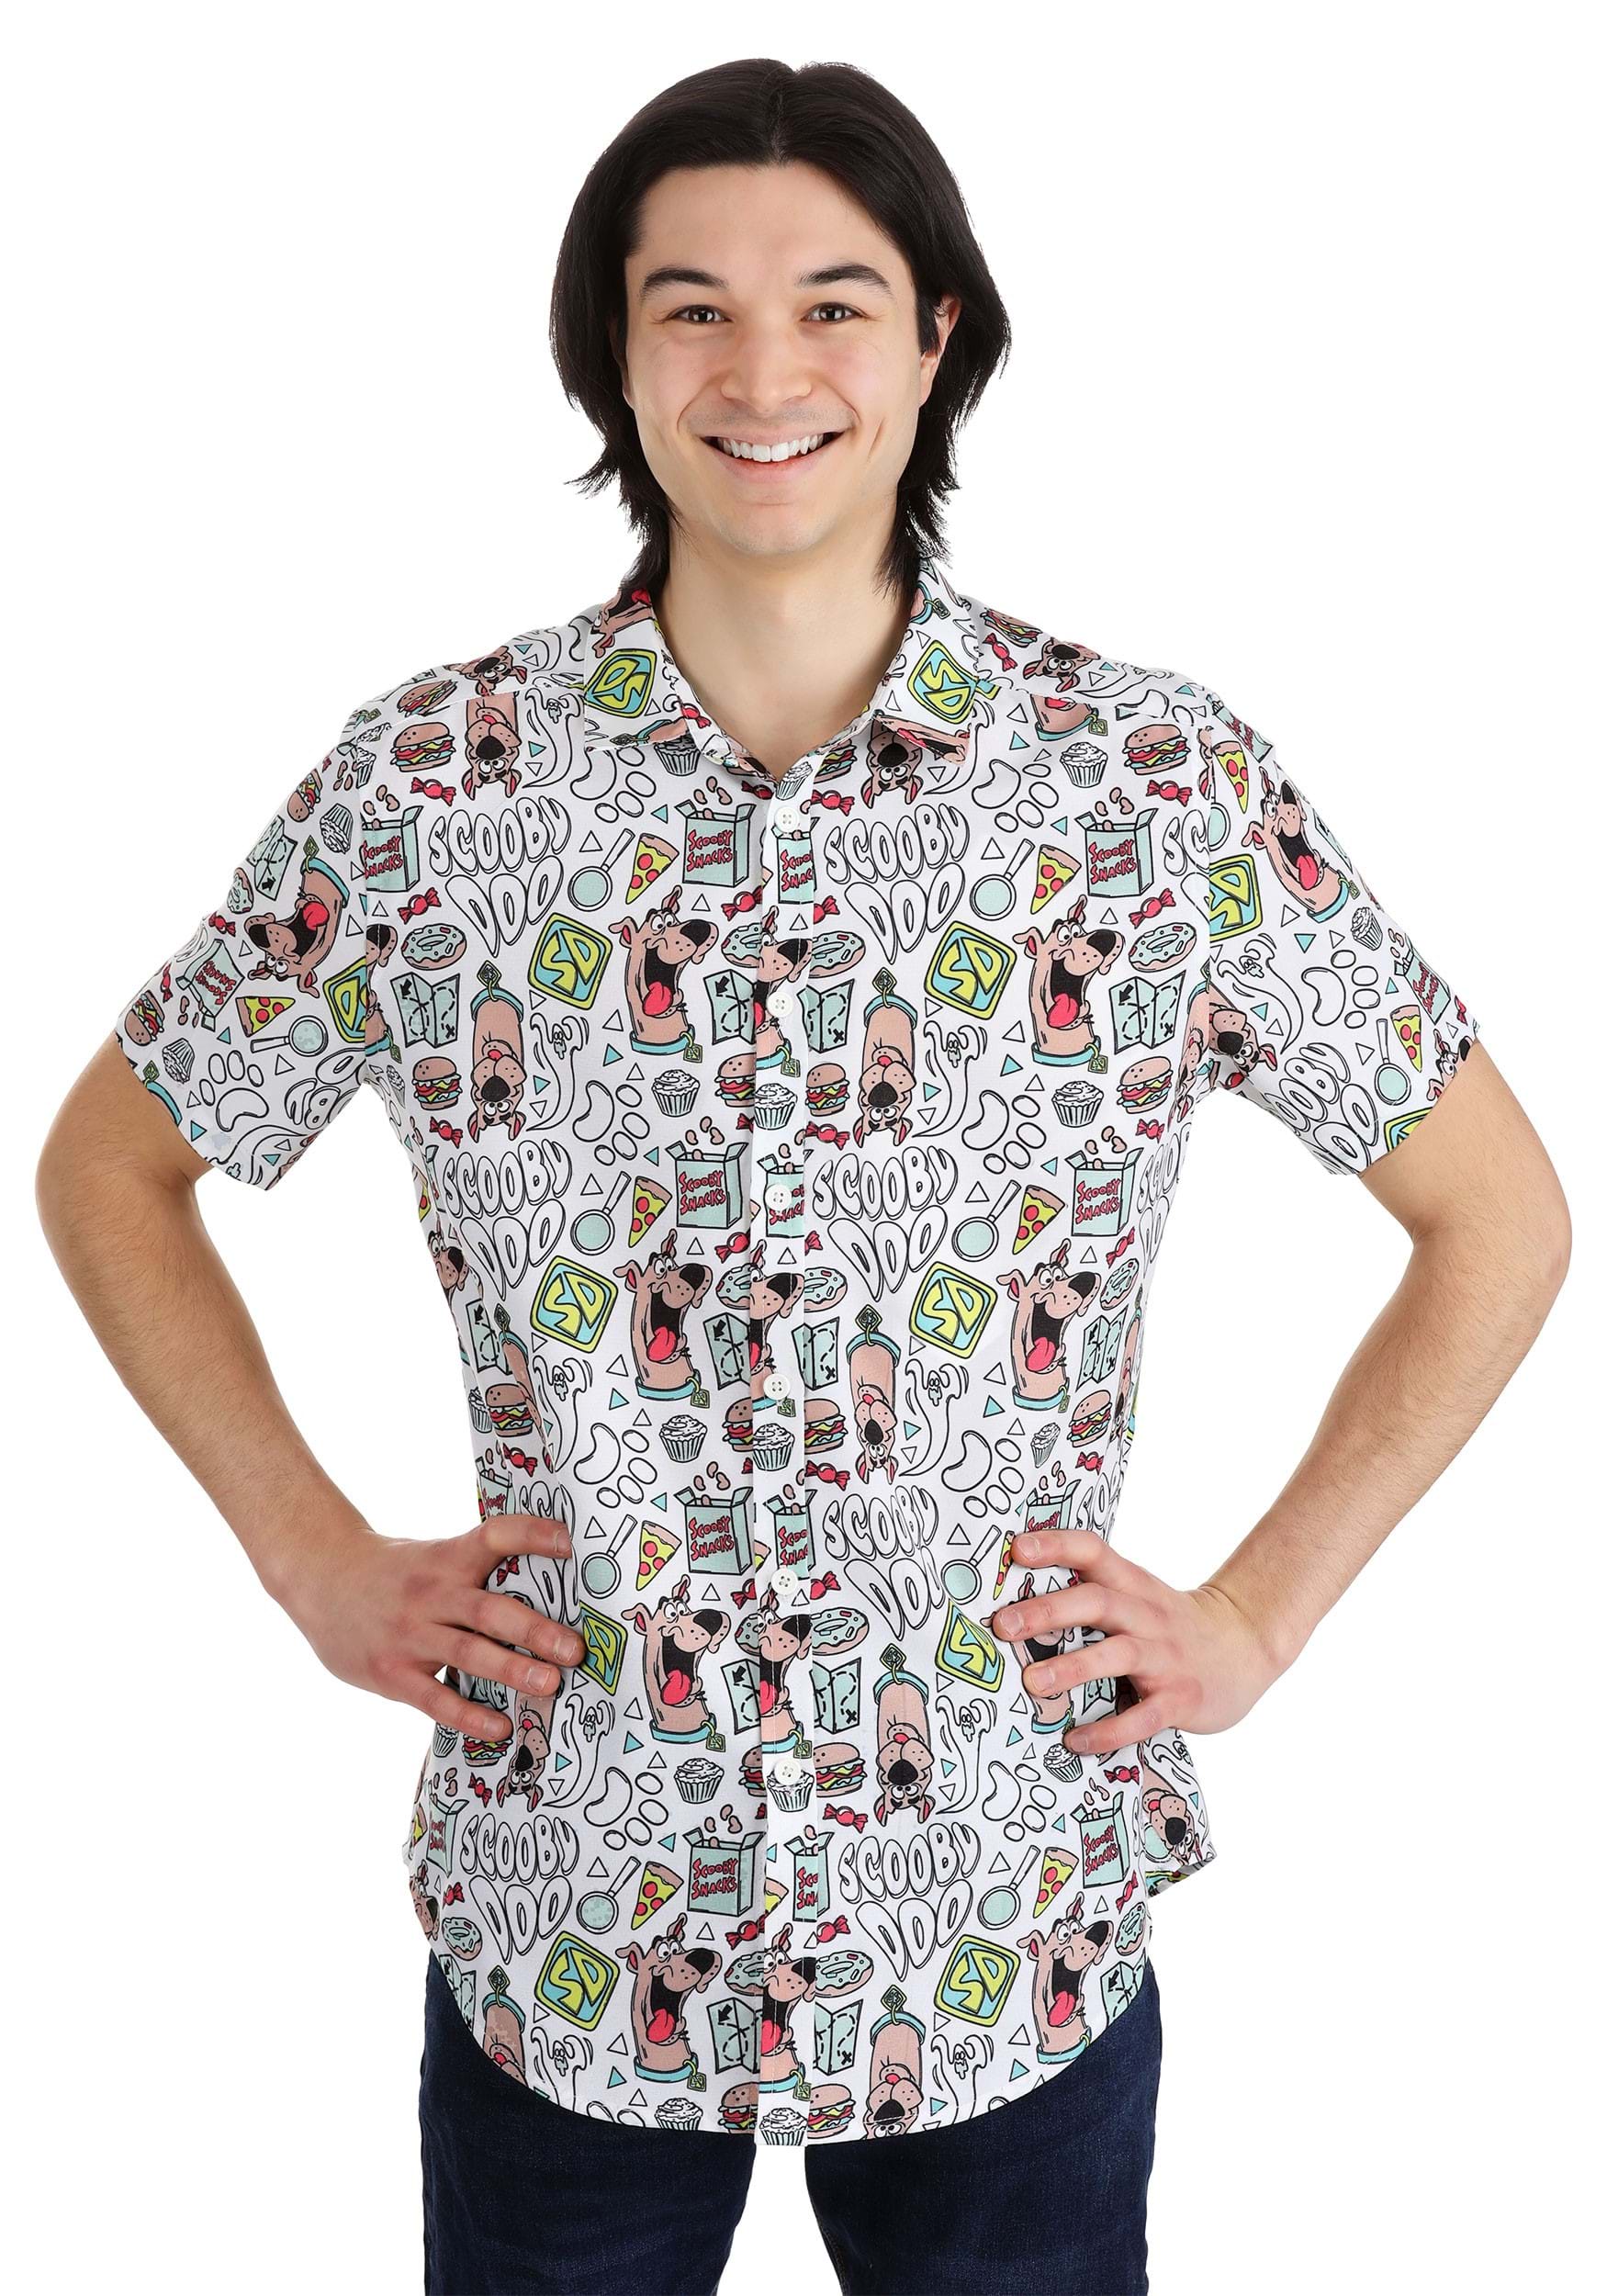 Scooby Doo Adult Sublimated Shirt